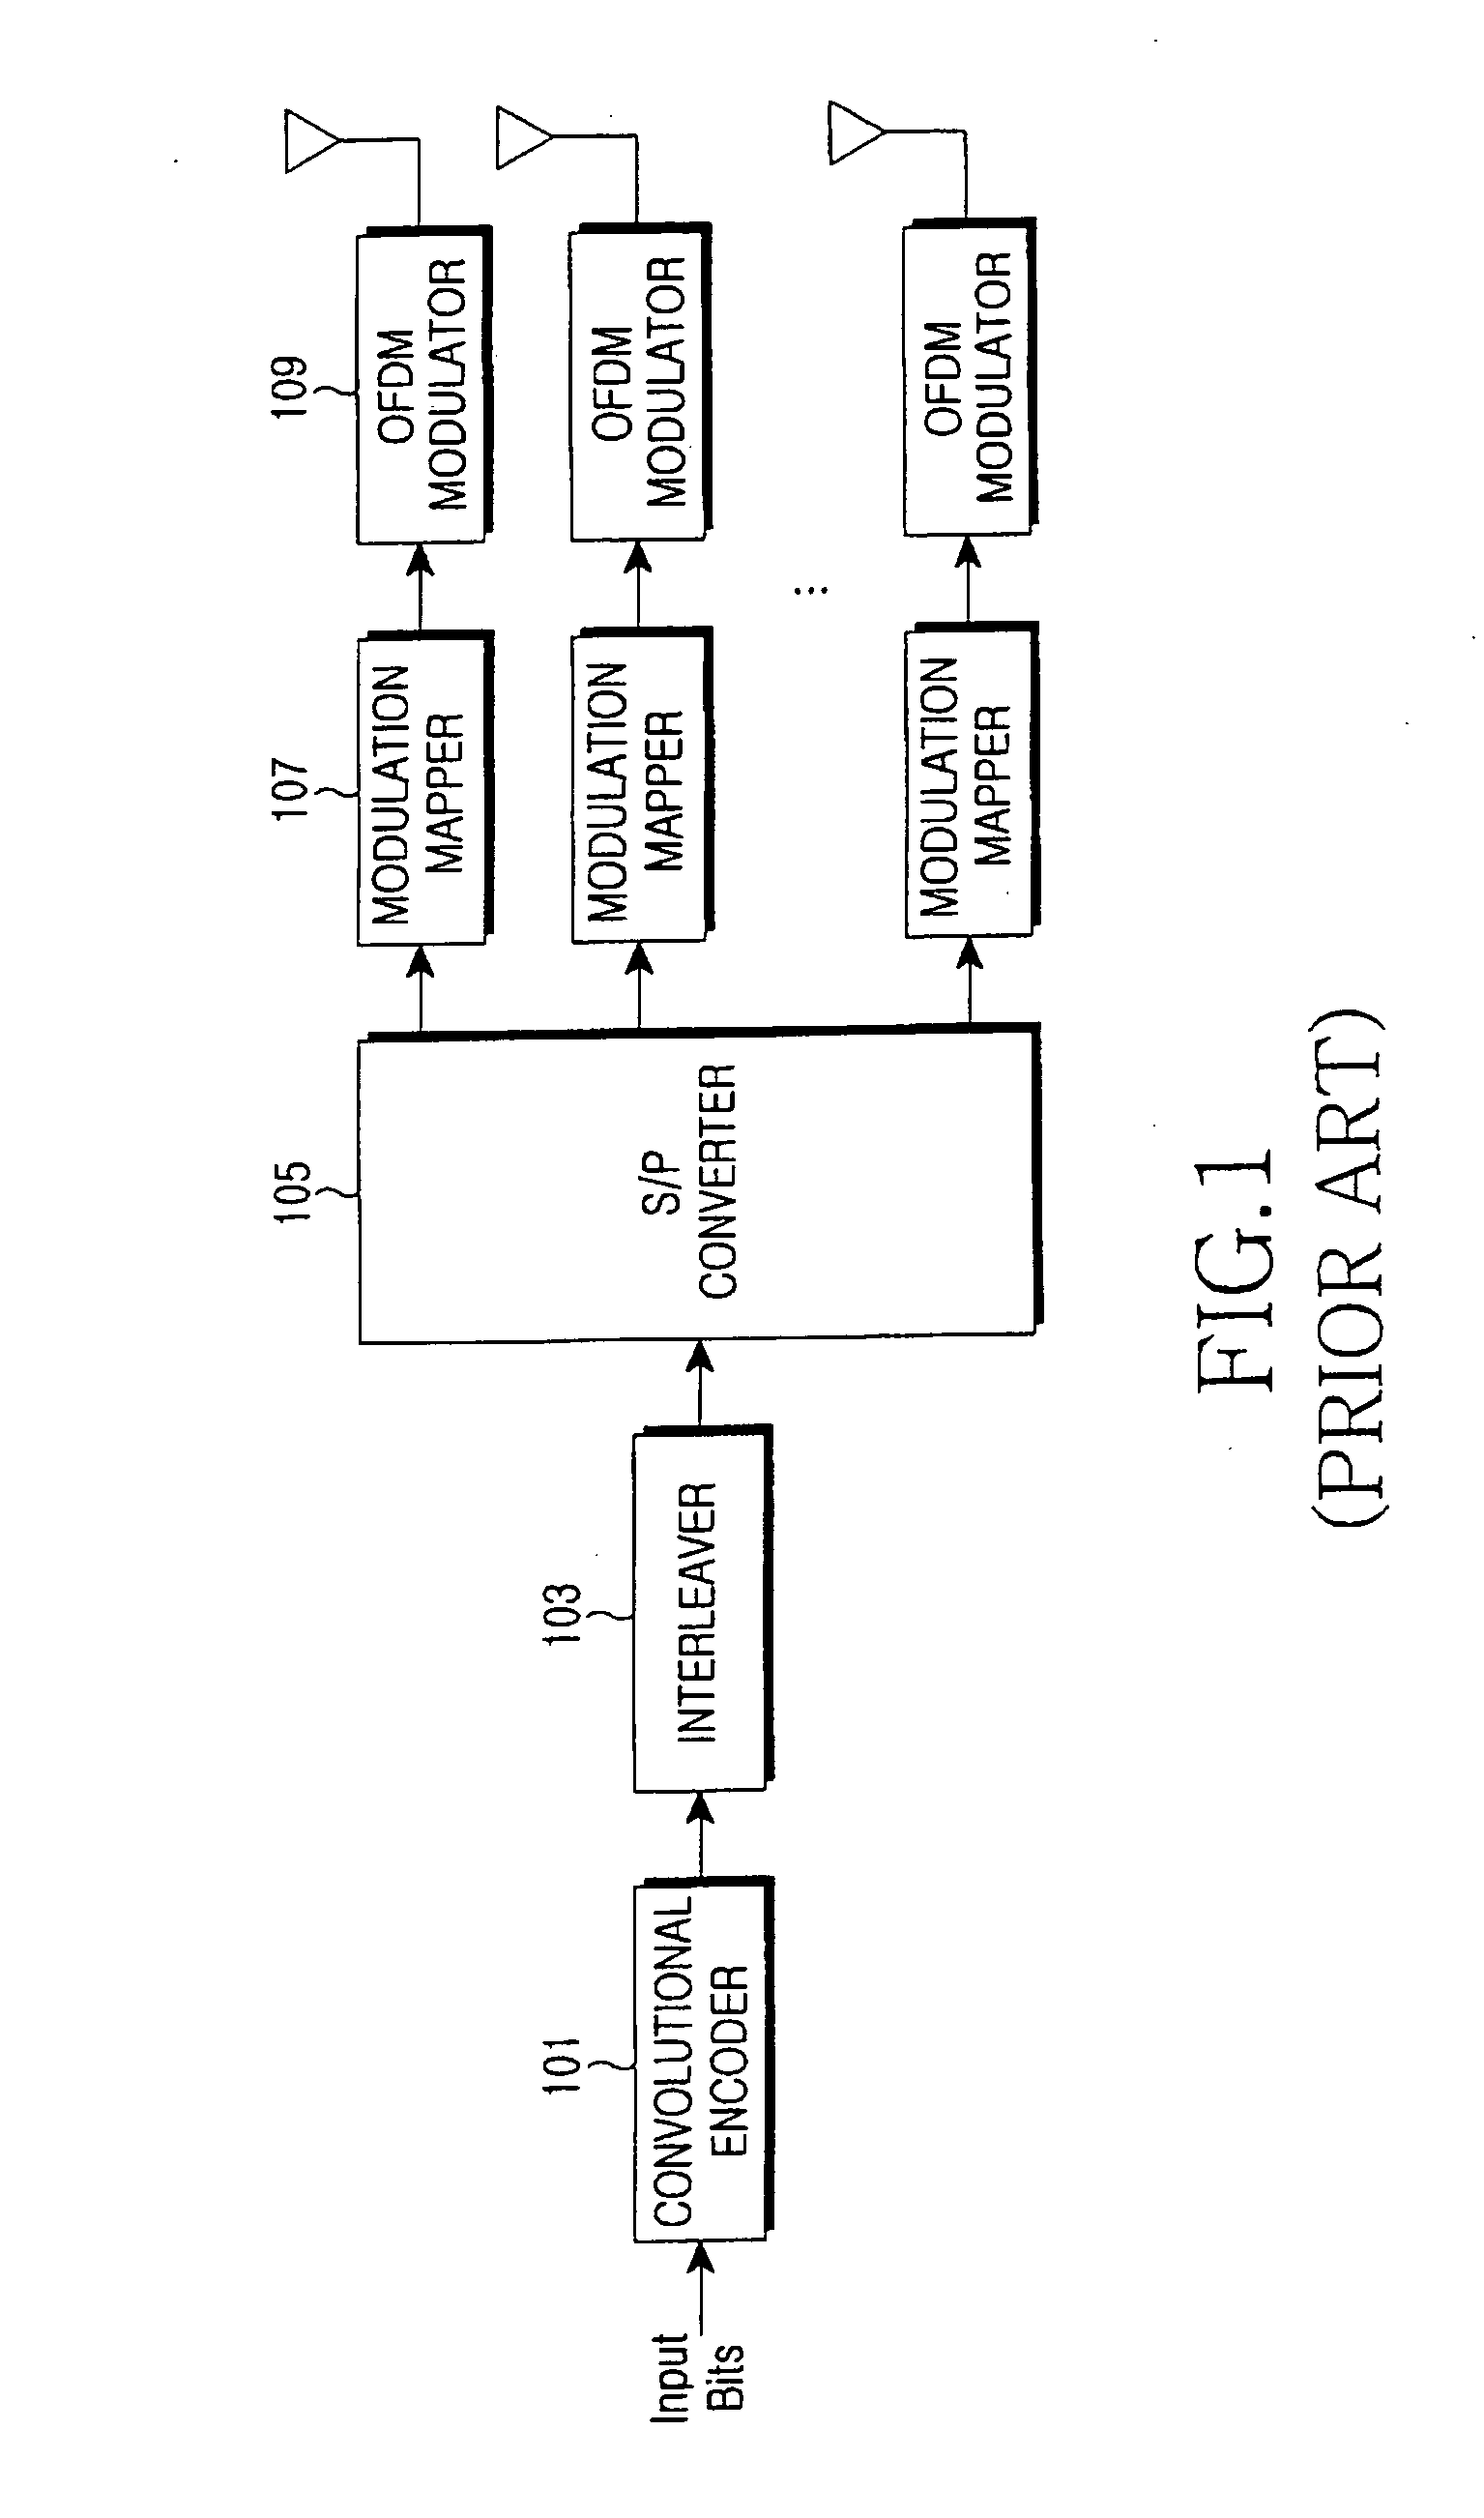 Apparatus and method for transmitting bit-interleaved coded modulation signals in an orthogonal frequency division multiplexing system